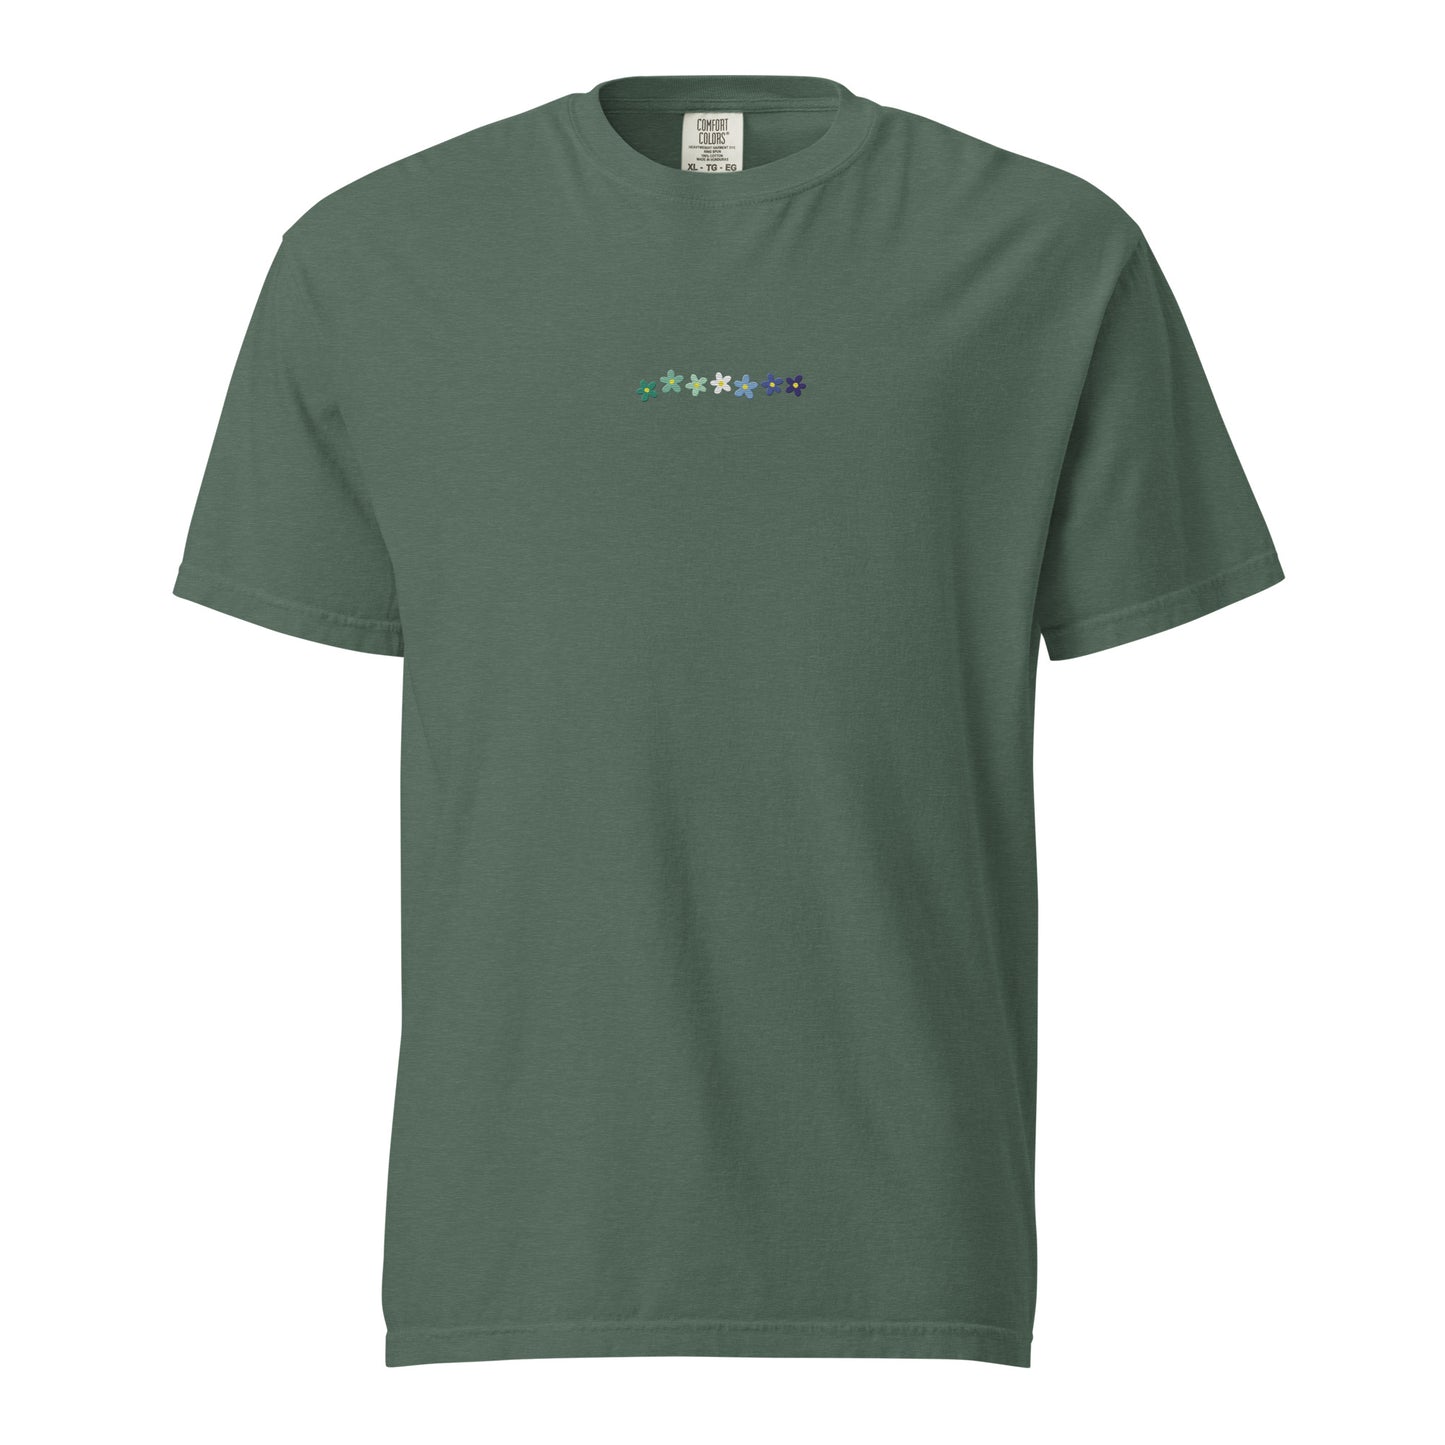 the MLM t-shirt